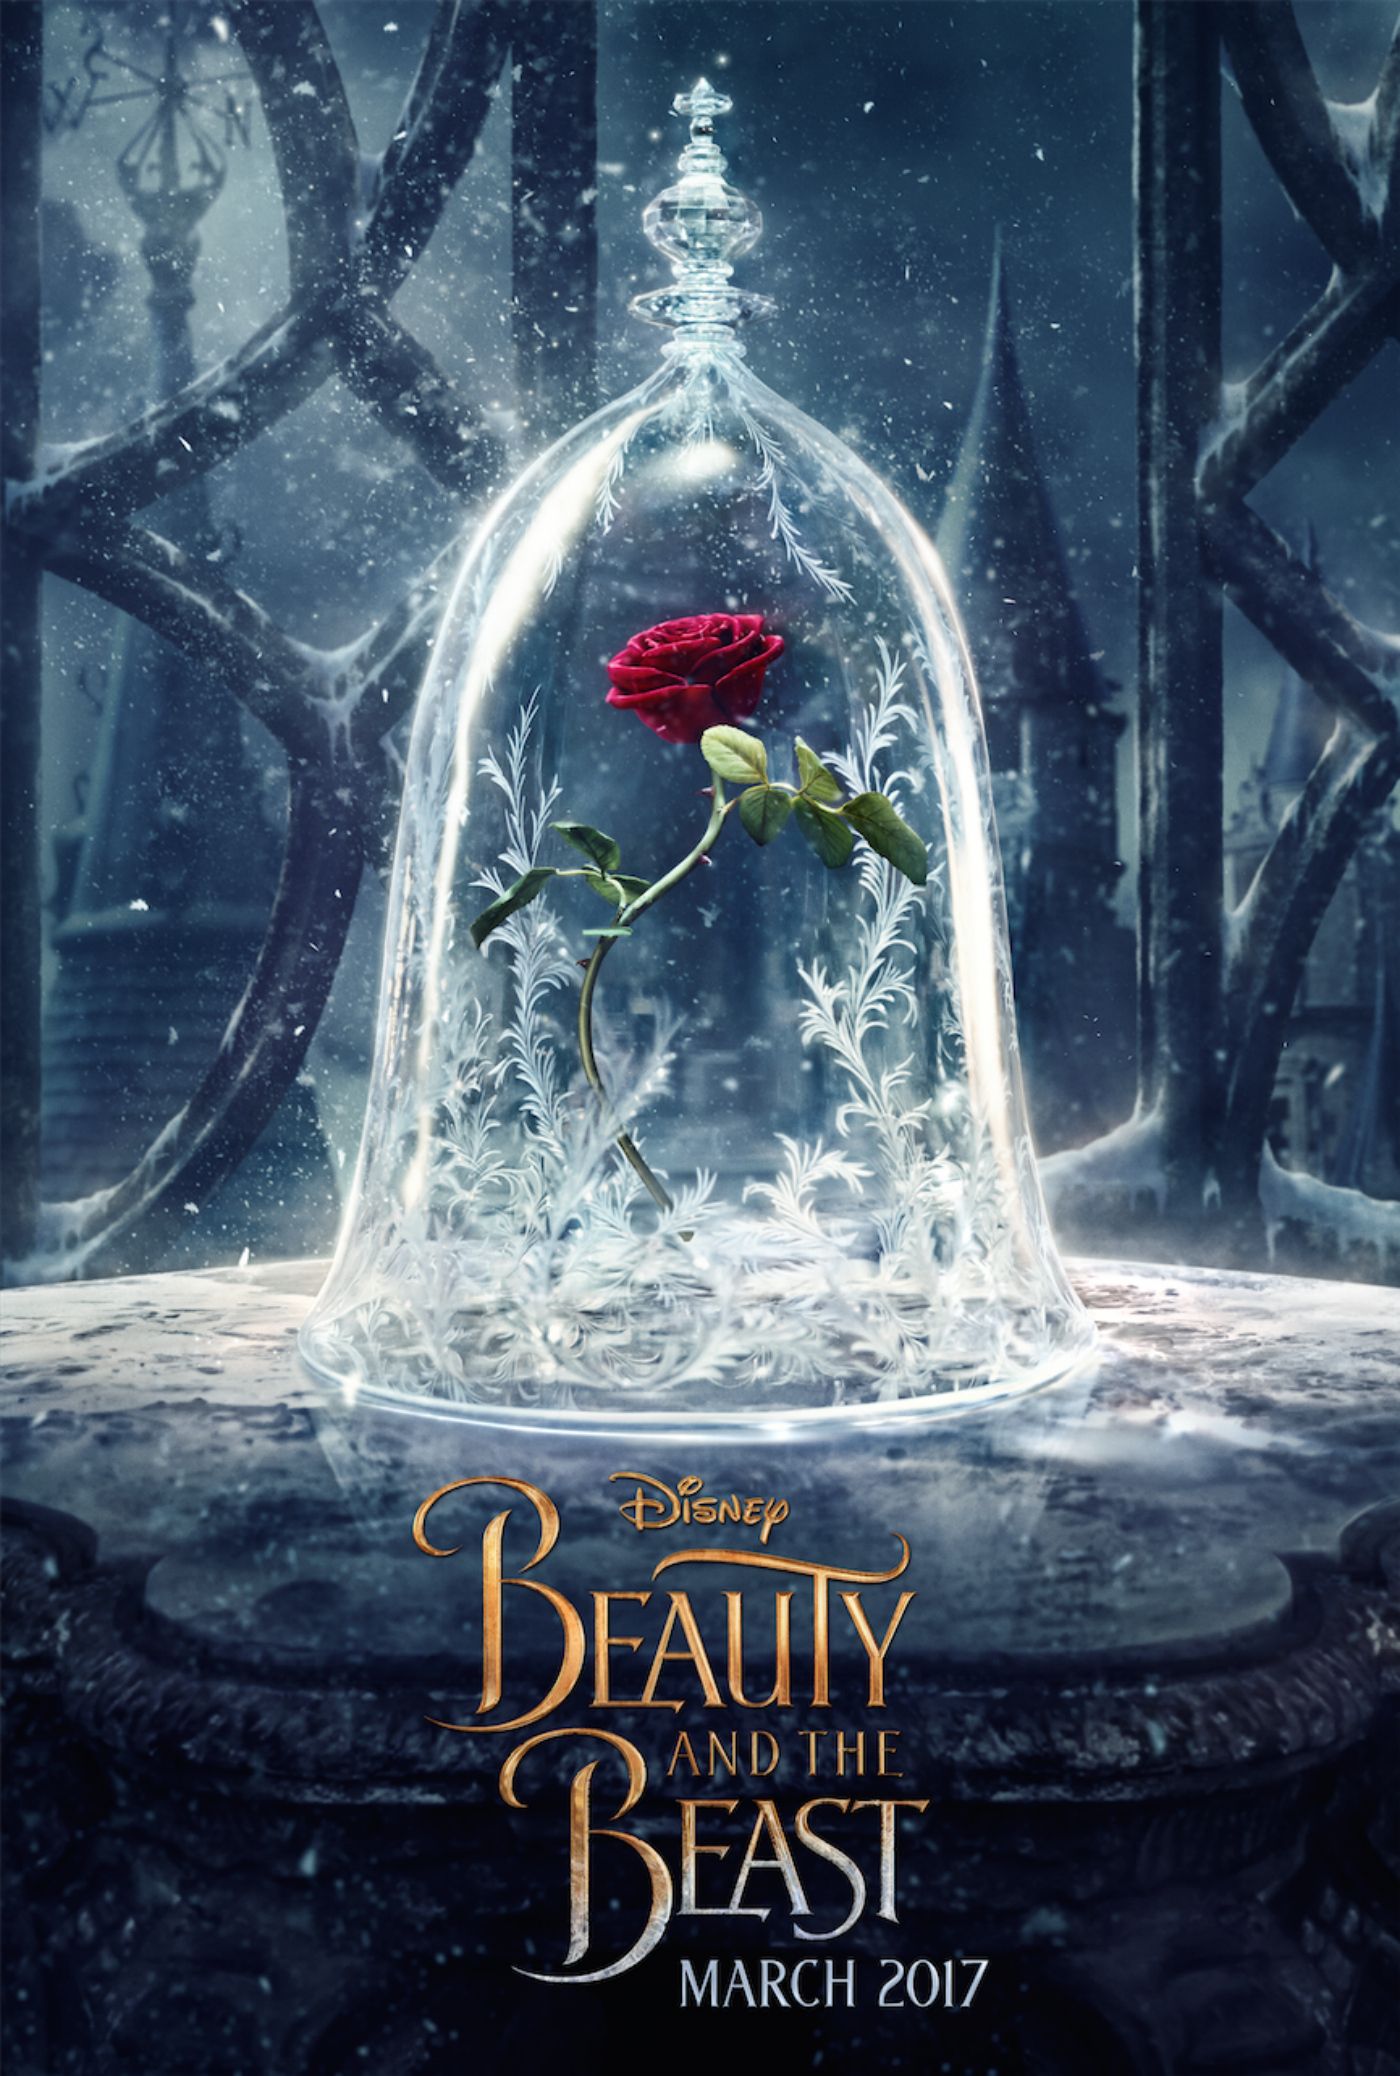 Disney Beauty and the Beast Poster